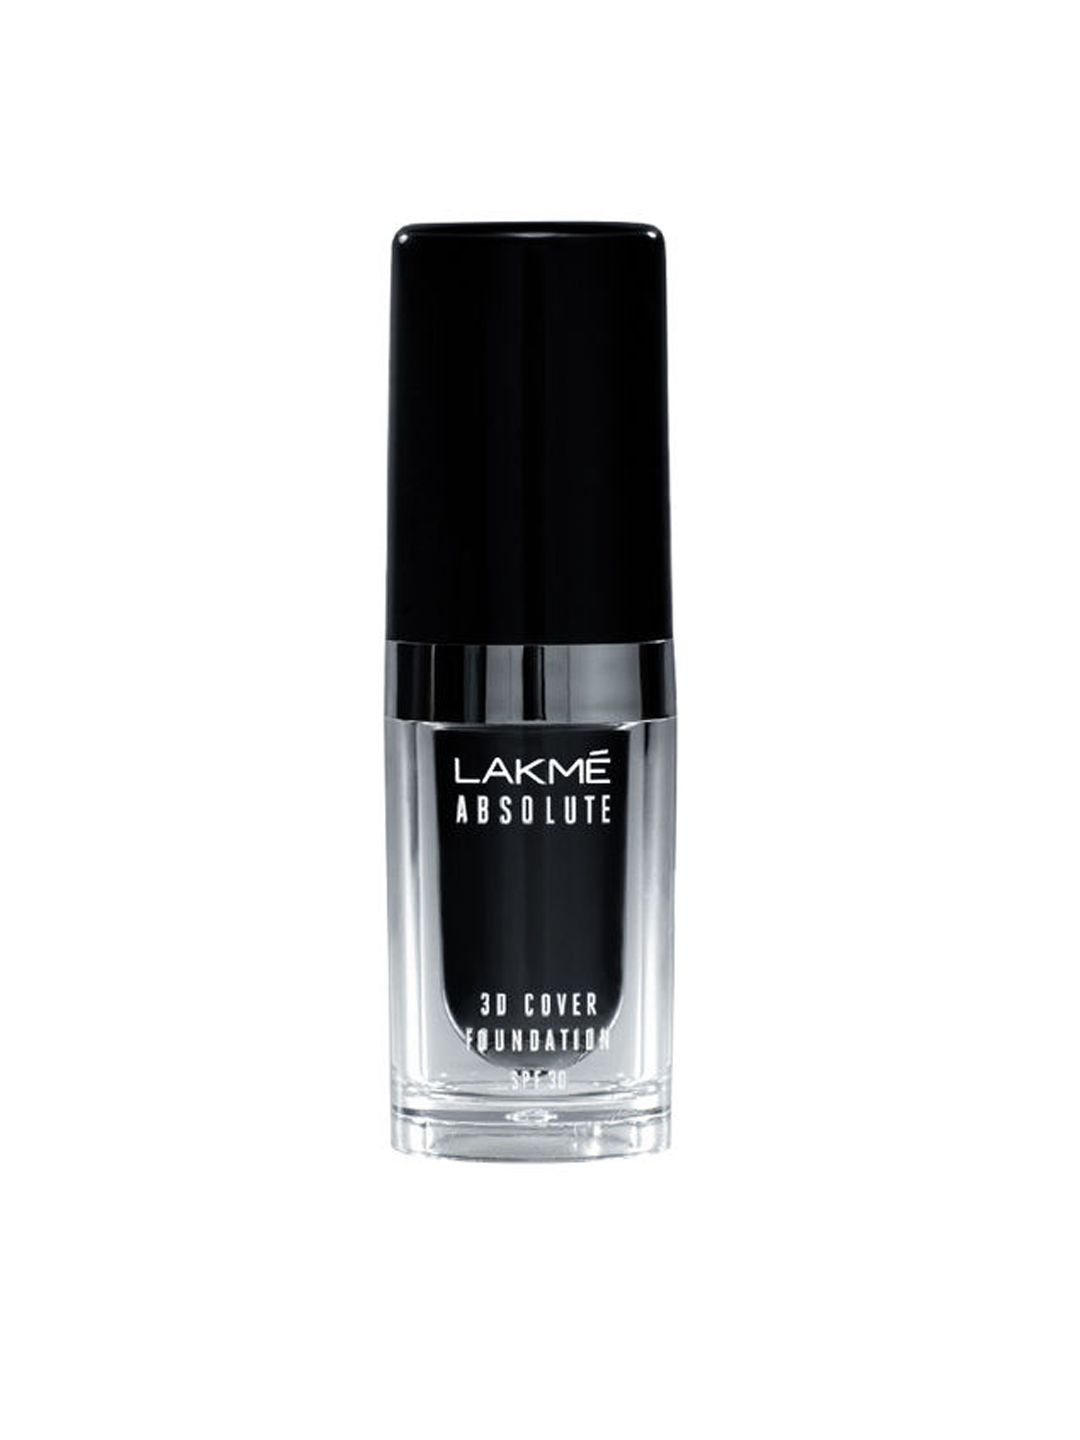 Lakme Absolute 3D Cover Foundation SPF 30 - Neutral Honey 15 ml Price in India